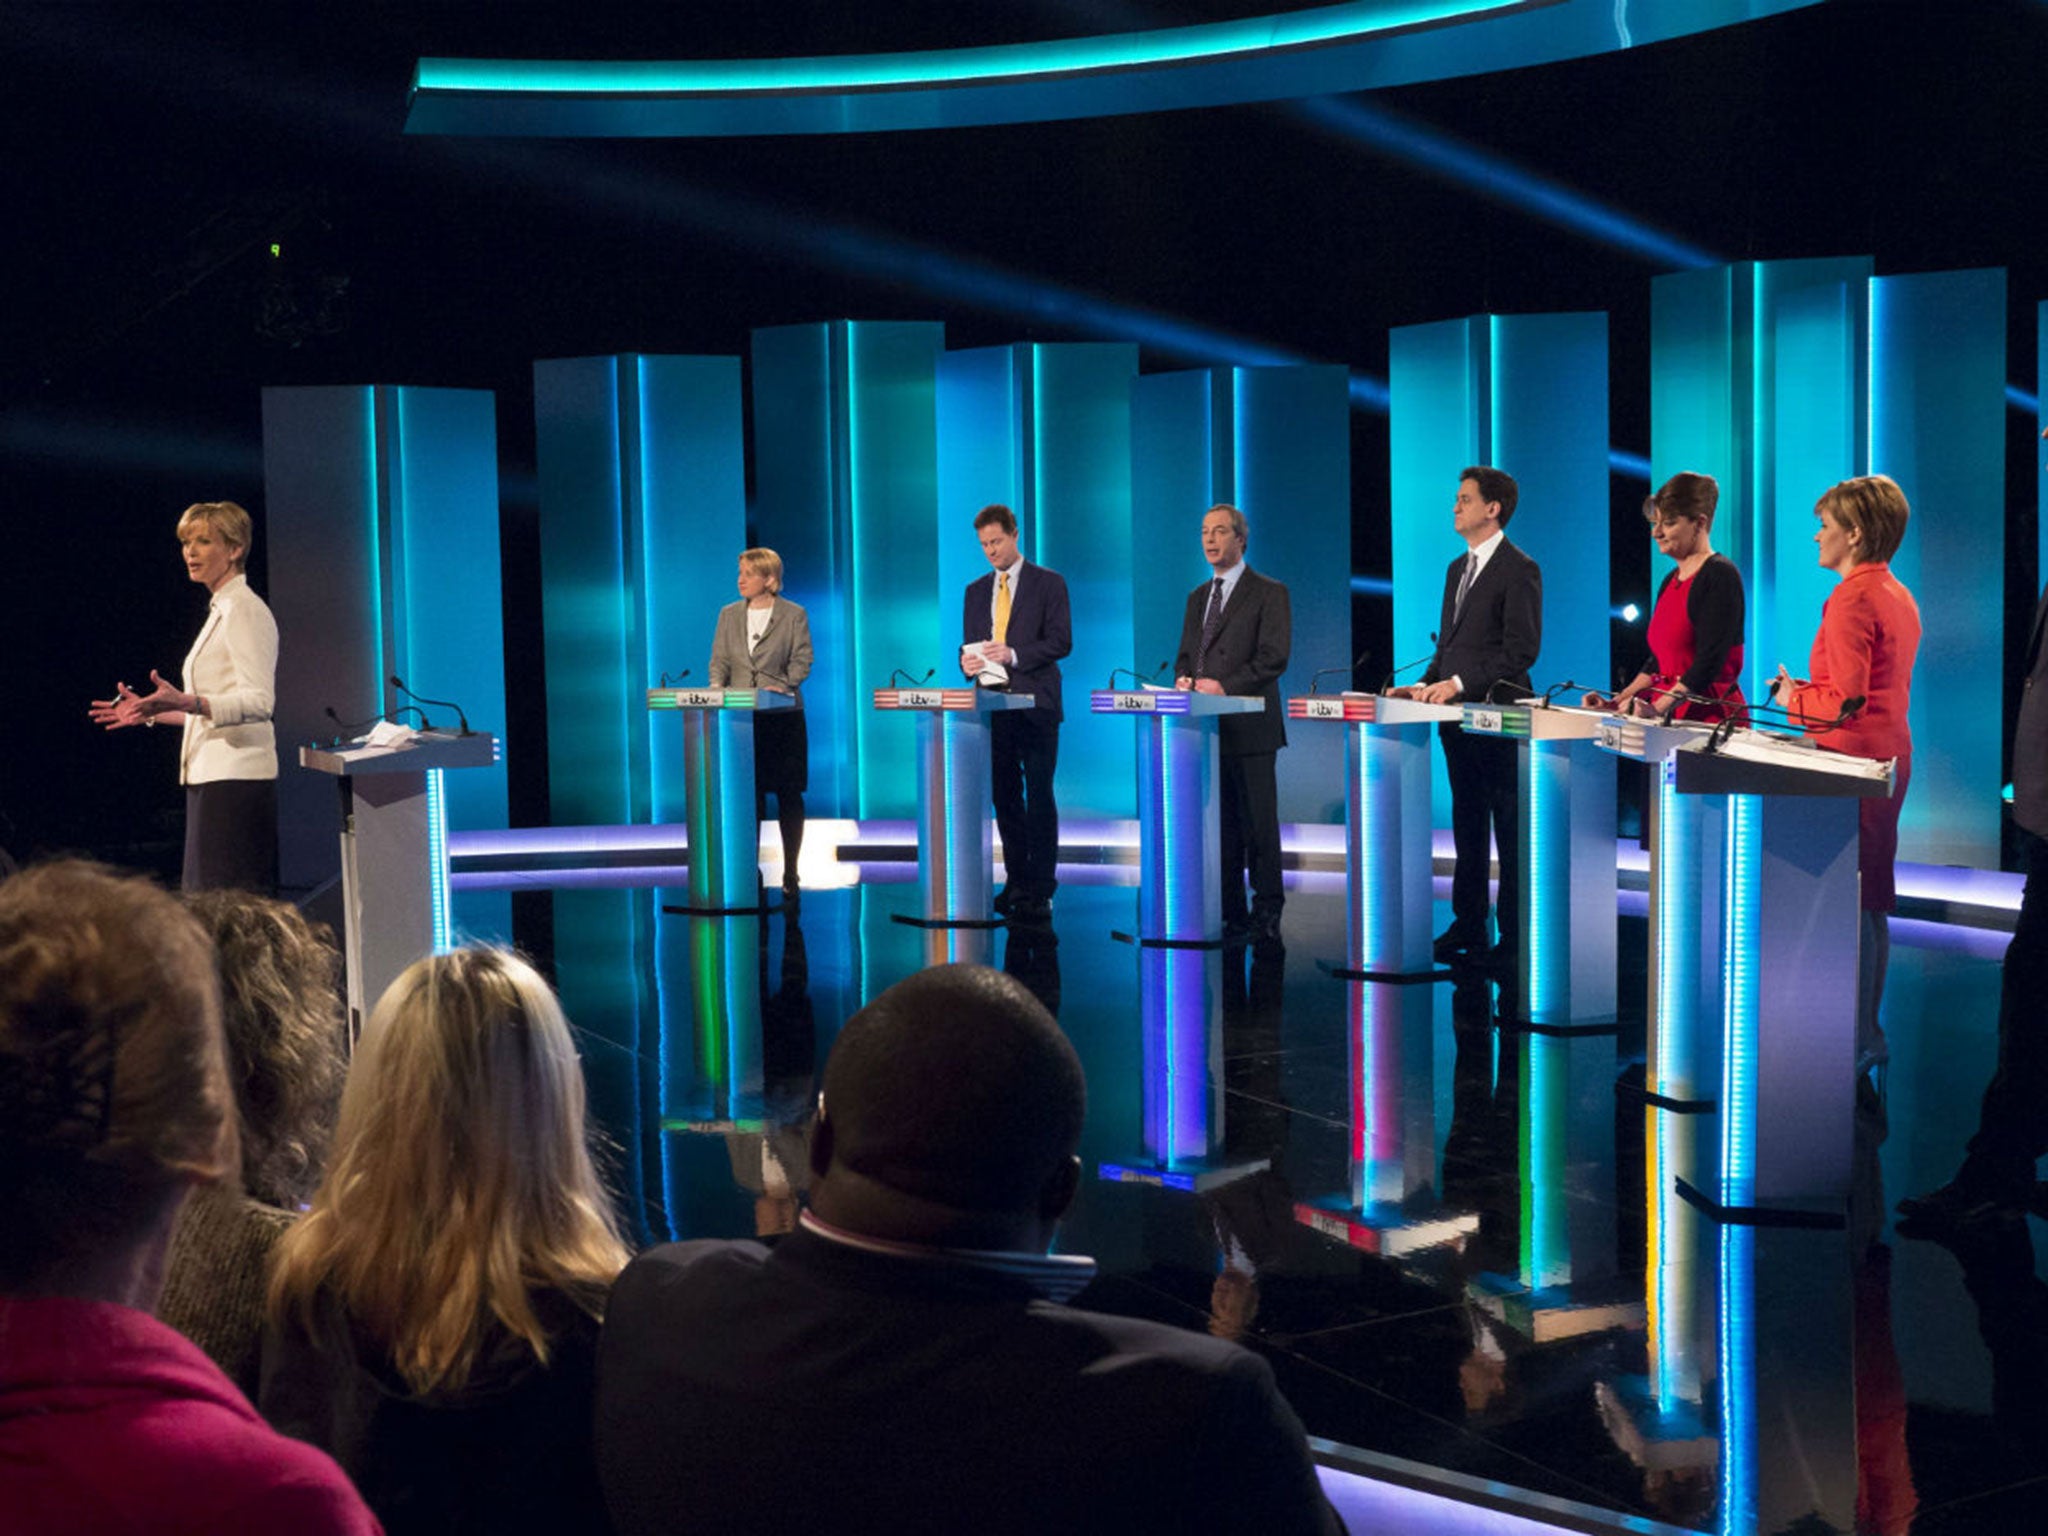 The leaders of the main political parties all agreed to take part in televised debates during the 2015 general election